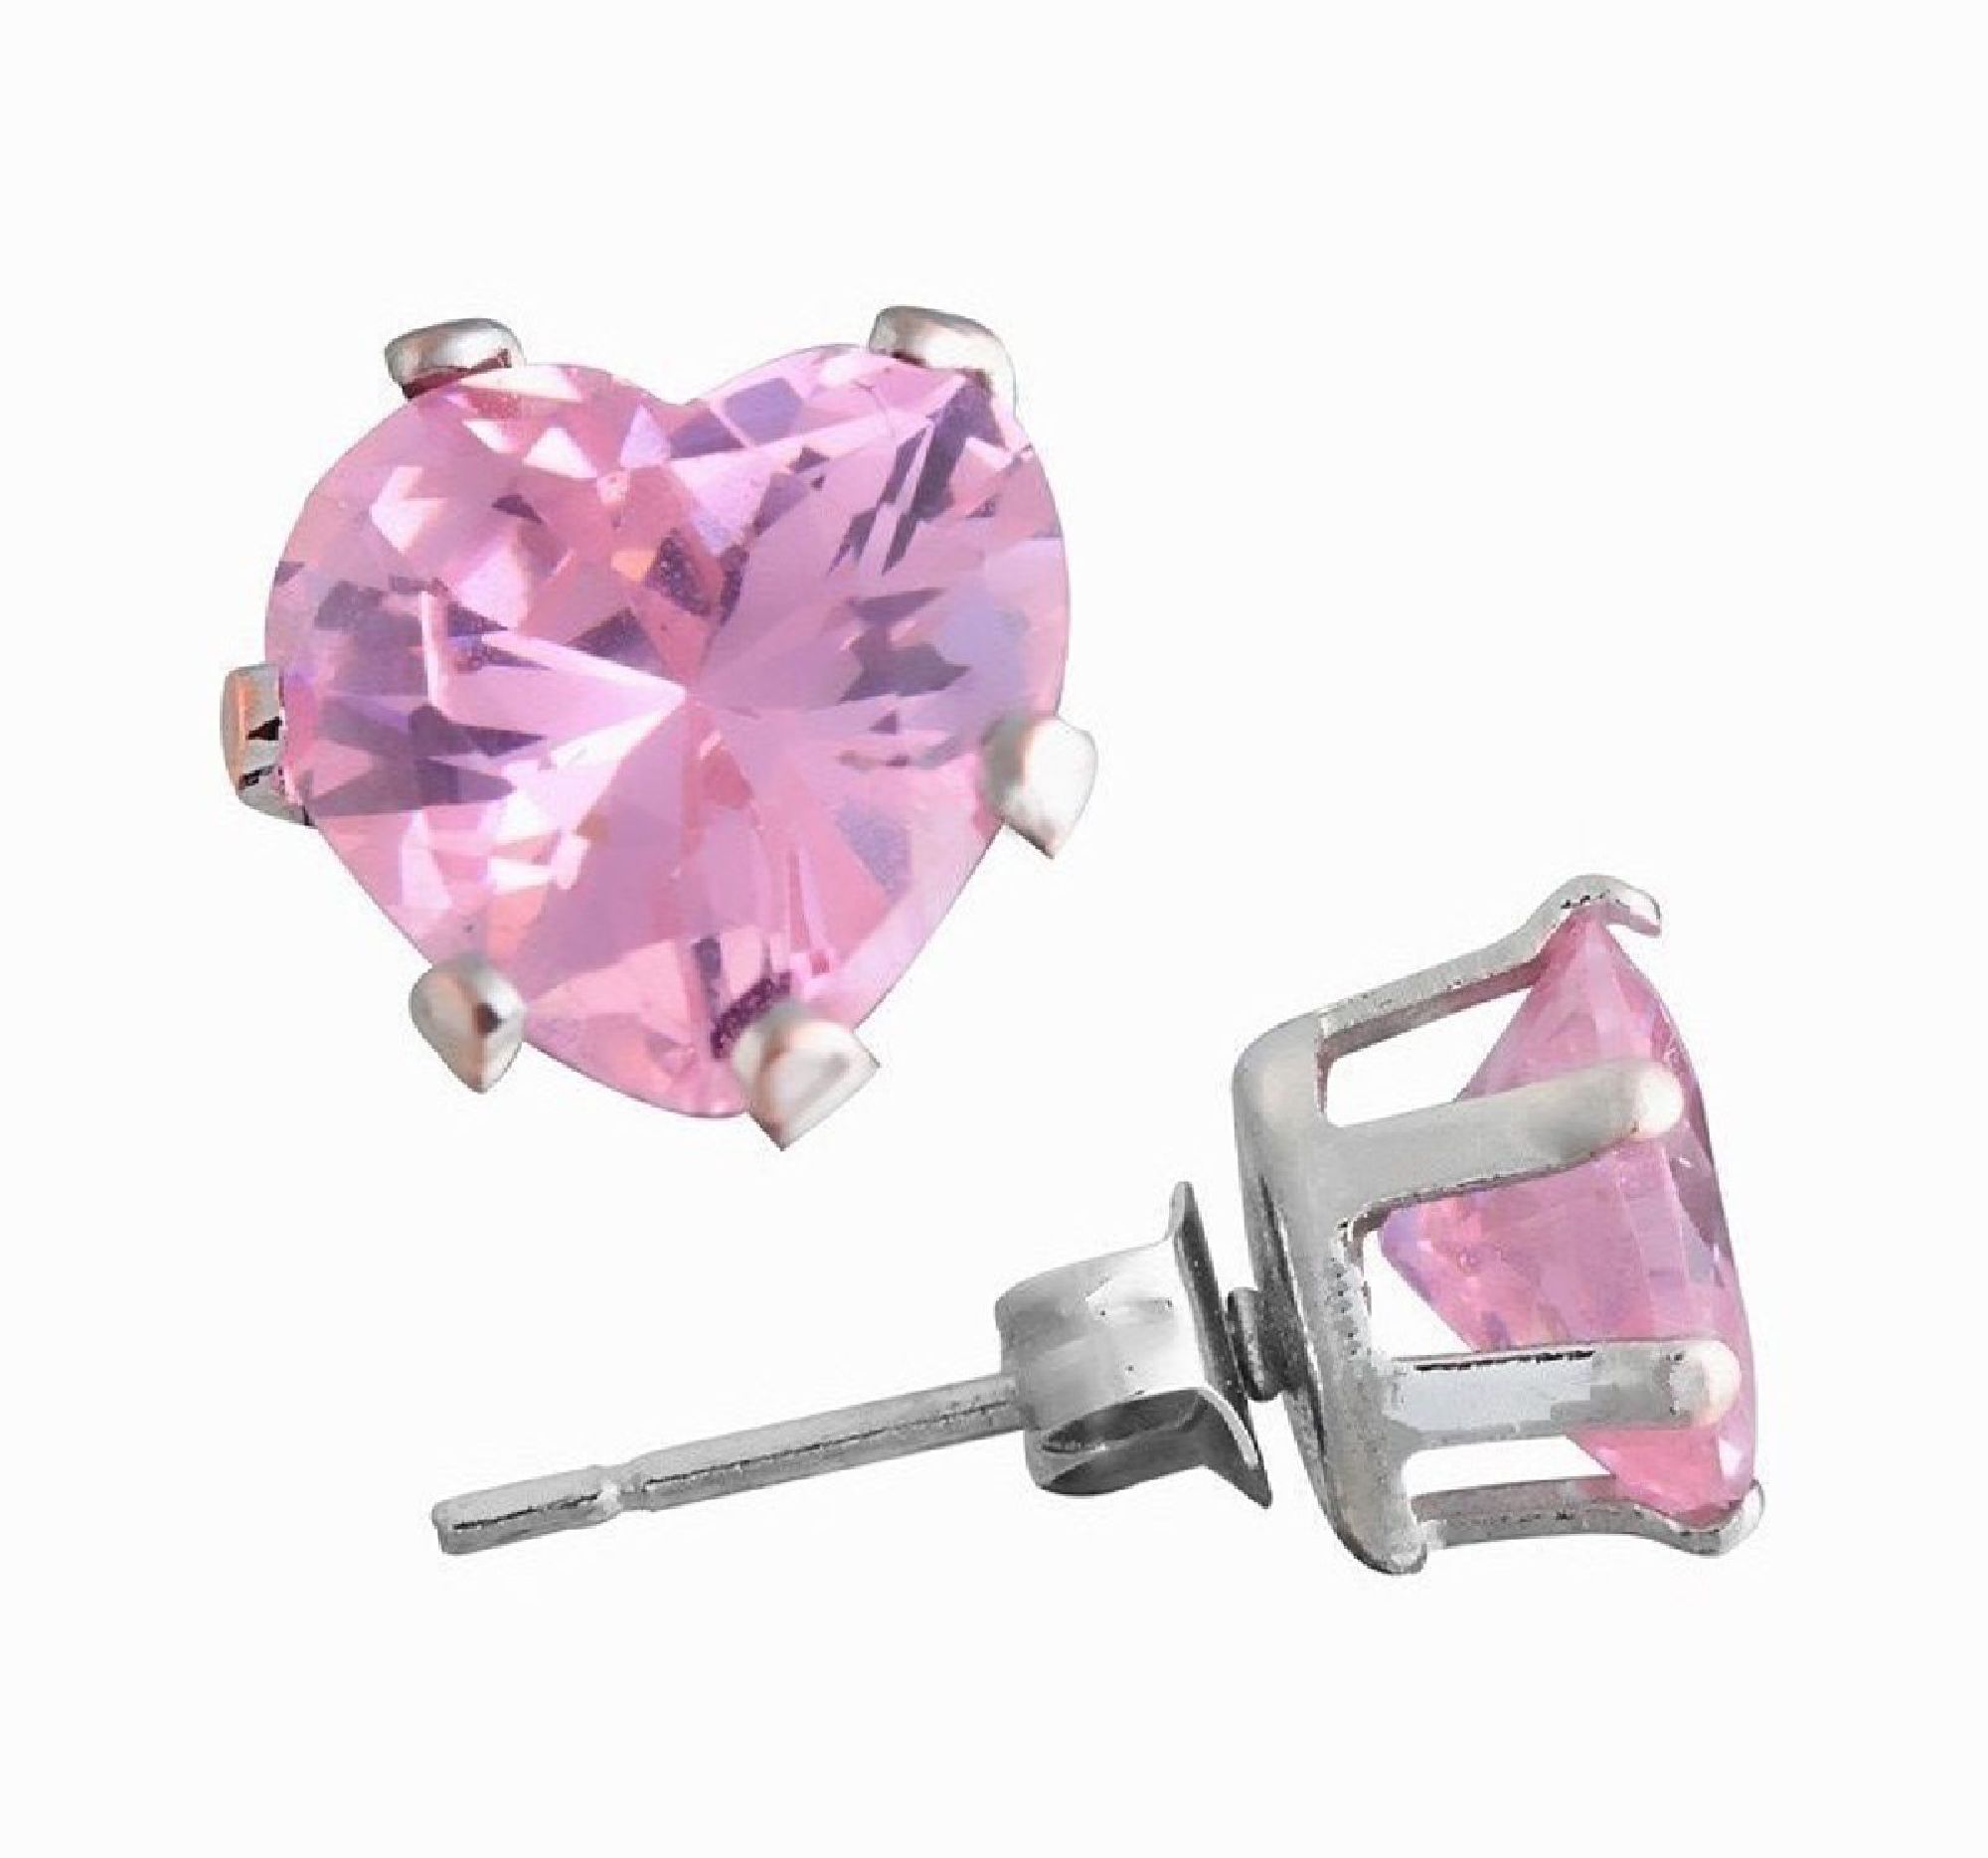 ParisJewelry.com 1 Carat Heart Shape Pink Diamond manmade Stud Earrings for Men in Platinum over Sterling Silver Designed in France